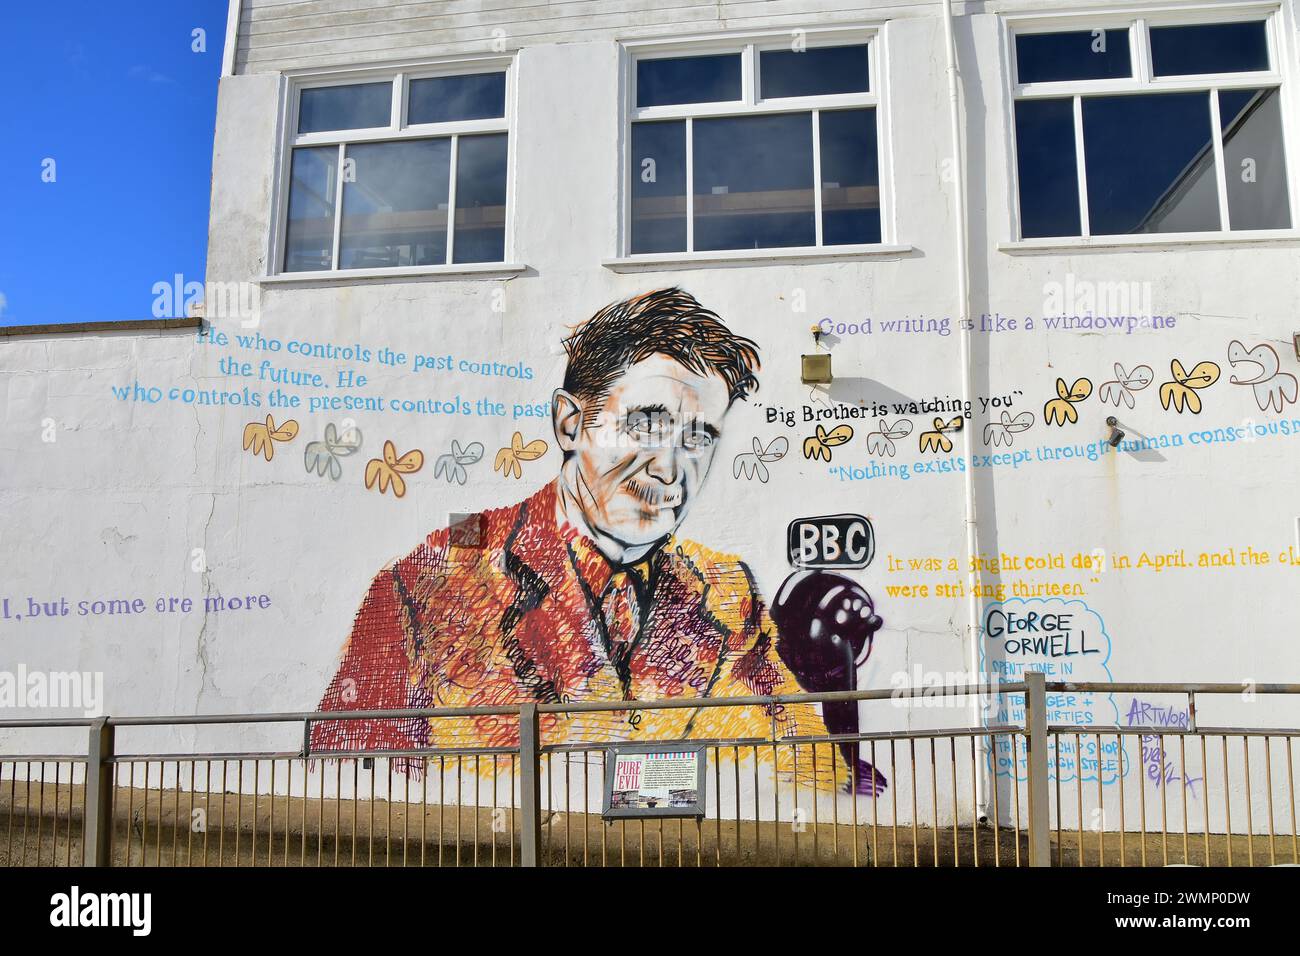 George Orwell at BBC Mural, Southwold Pier, Suffolk, England, UK with Quotes from Classic Books 1984 and Animal Farm Stock Photo